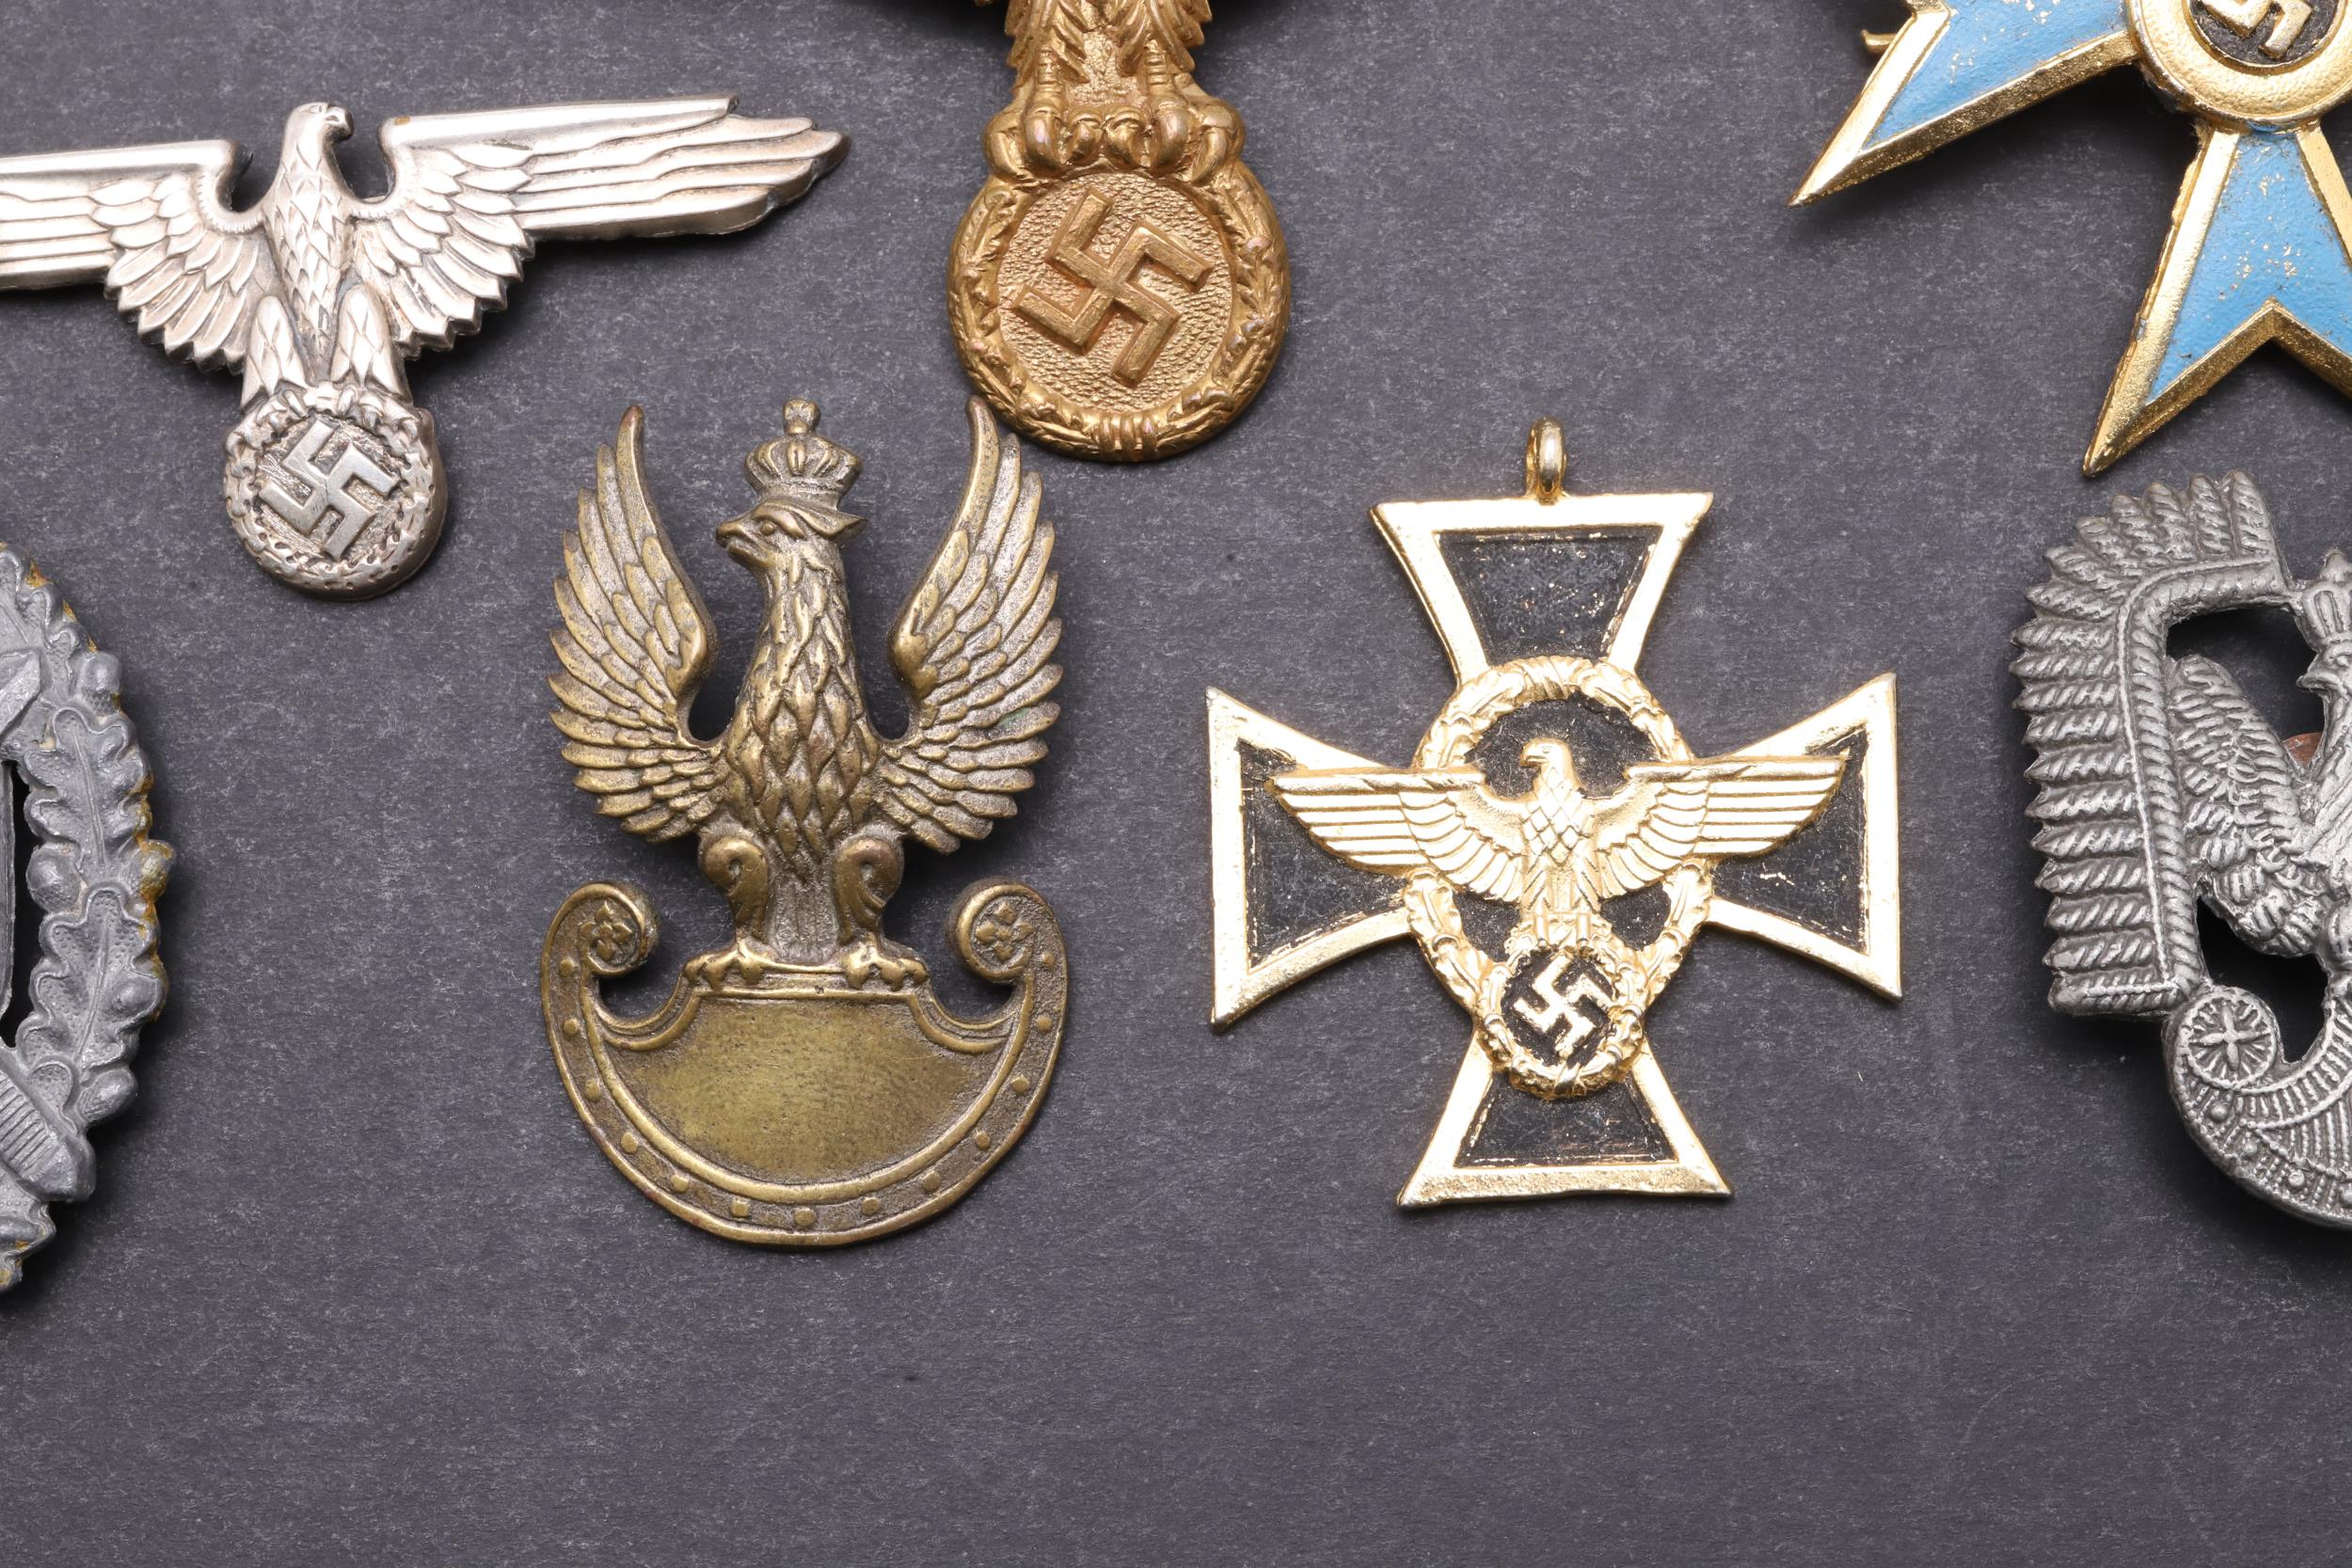 A SECOND WORLD WAR GERMAN MARKSMAN'S BADGE AND OTHERS SIMILAR. - Image 8 of 10